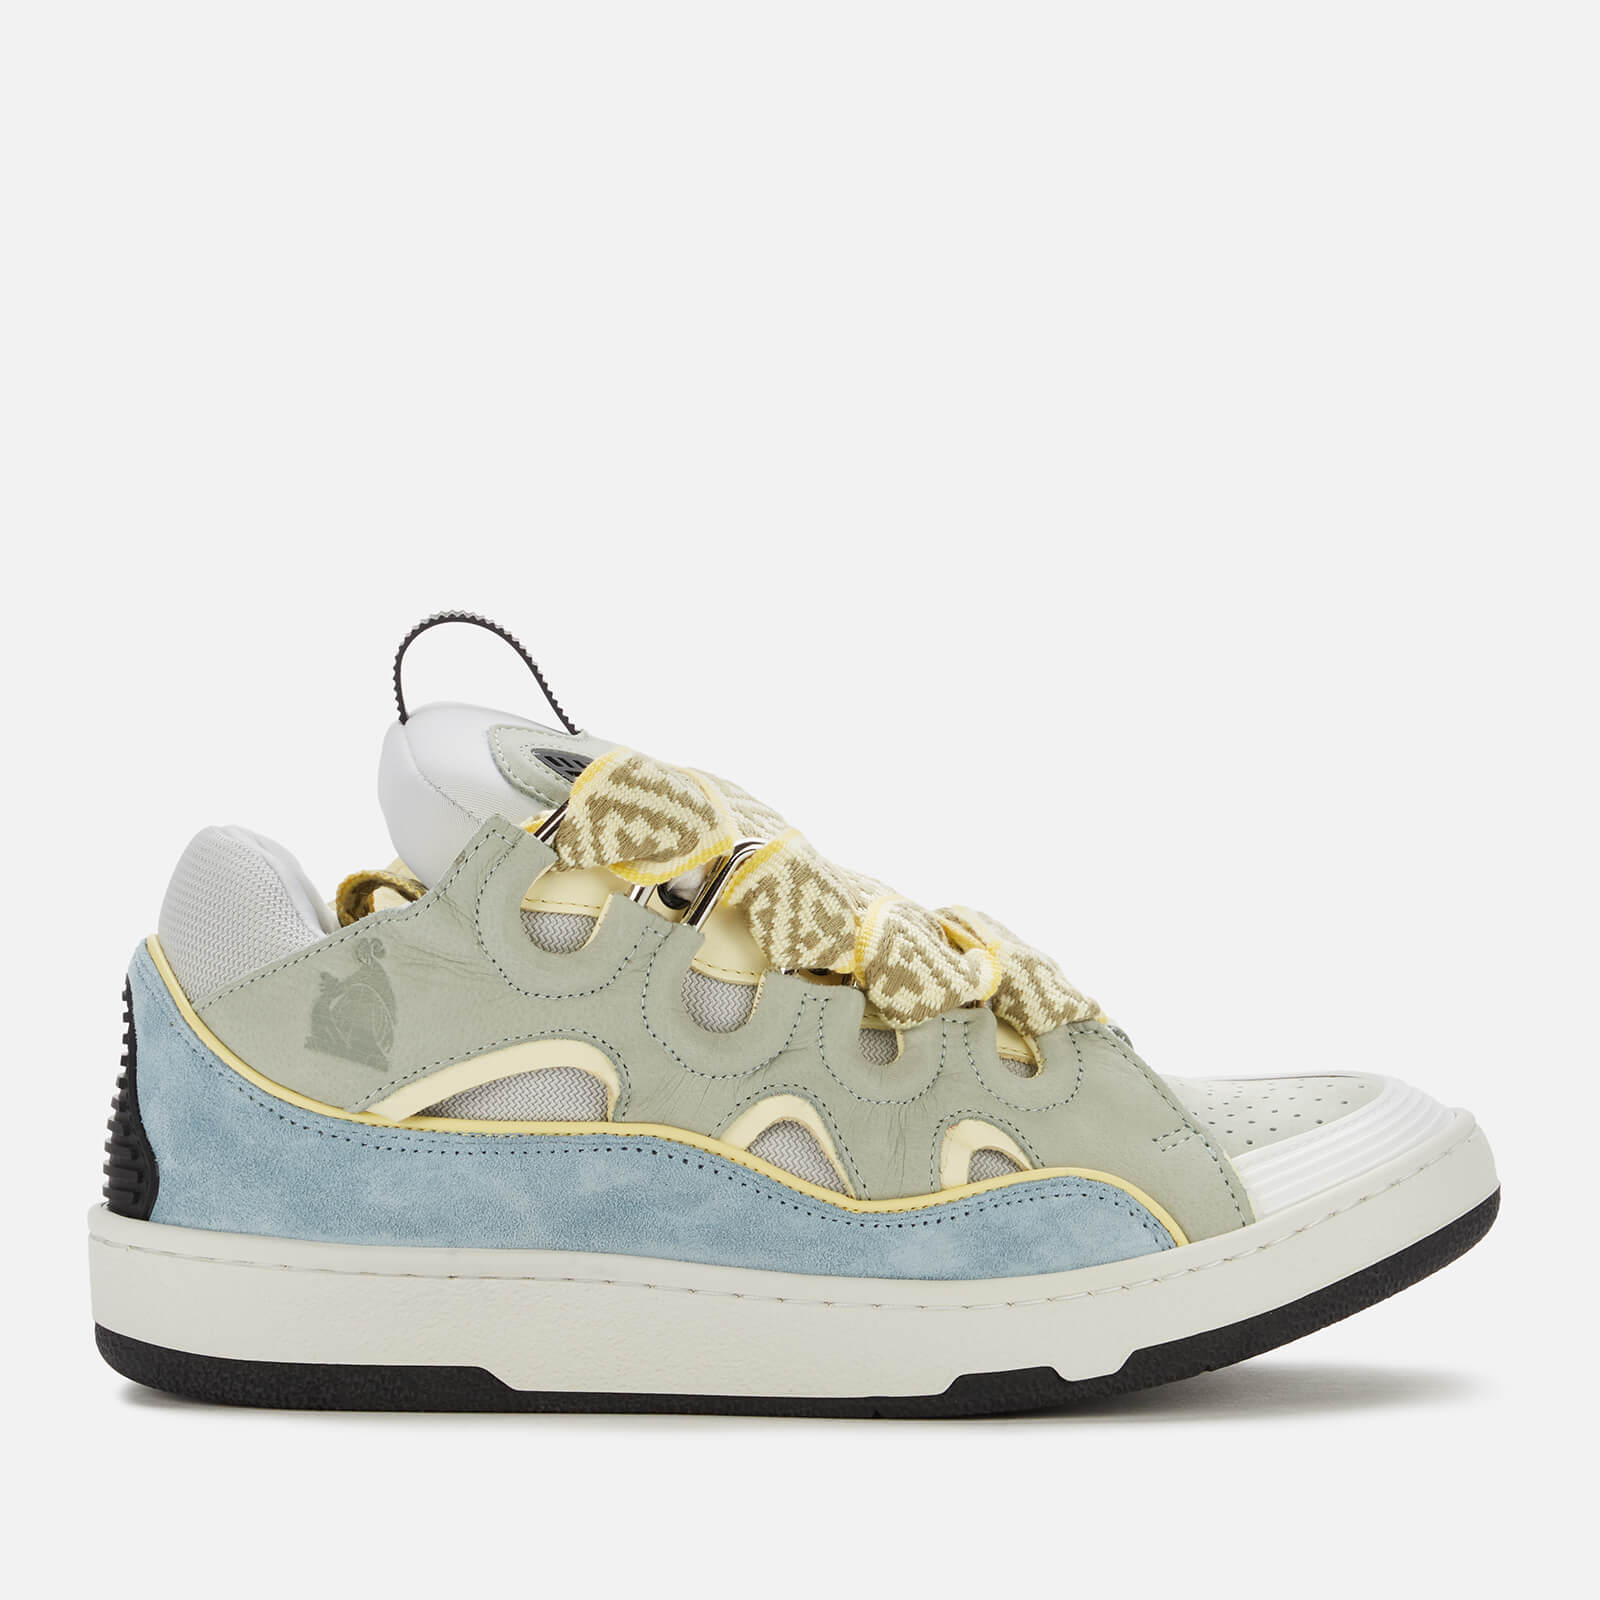 Lanvin Men's Curb Trainers - Ice Blue/Pale Green - UK 7